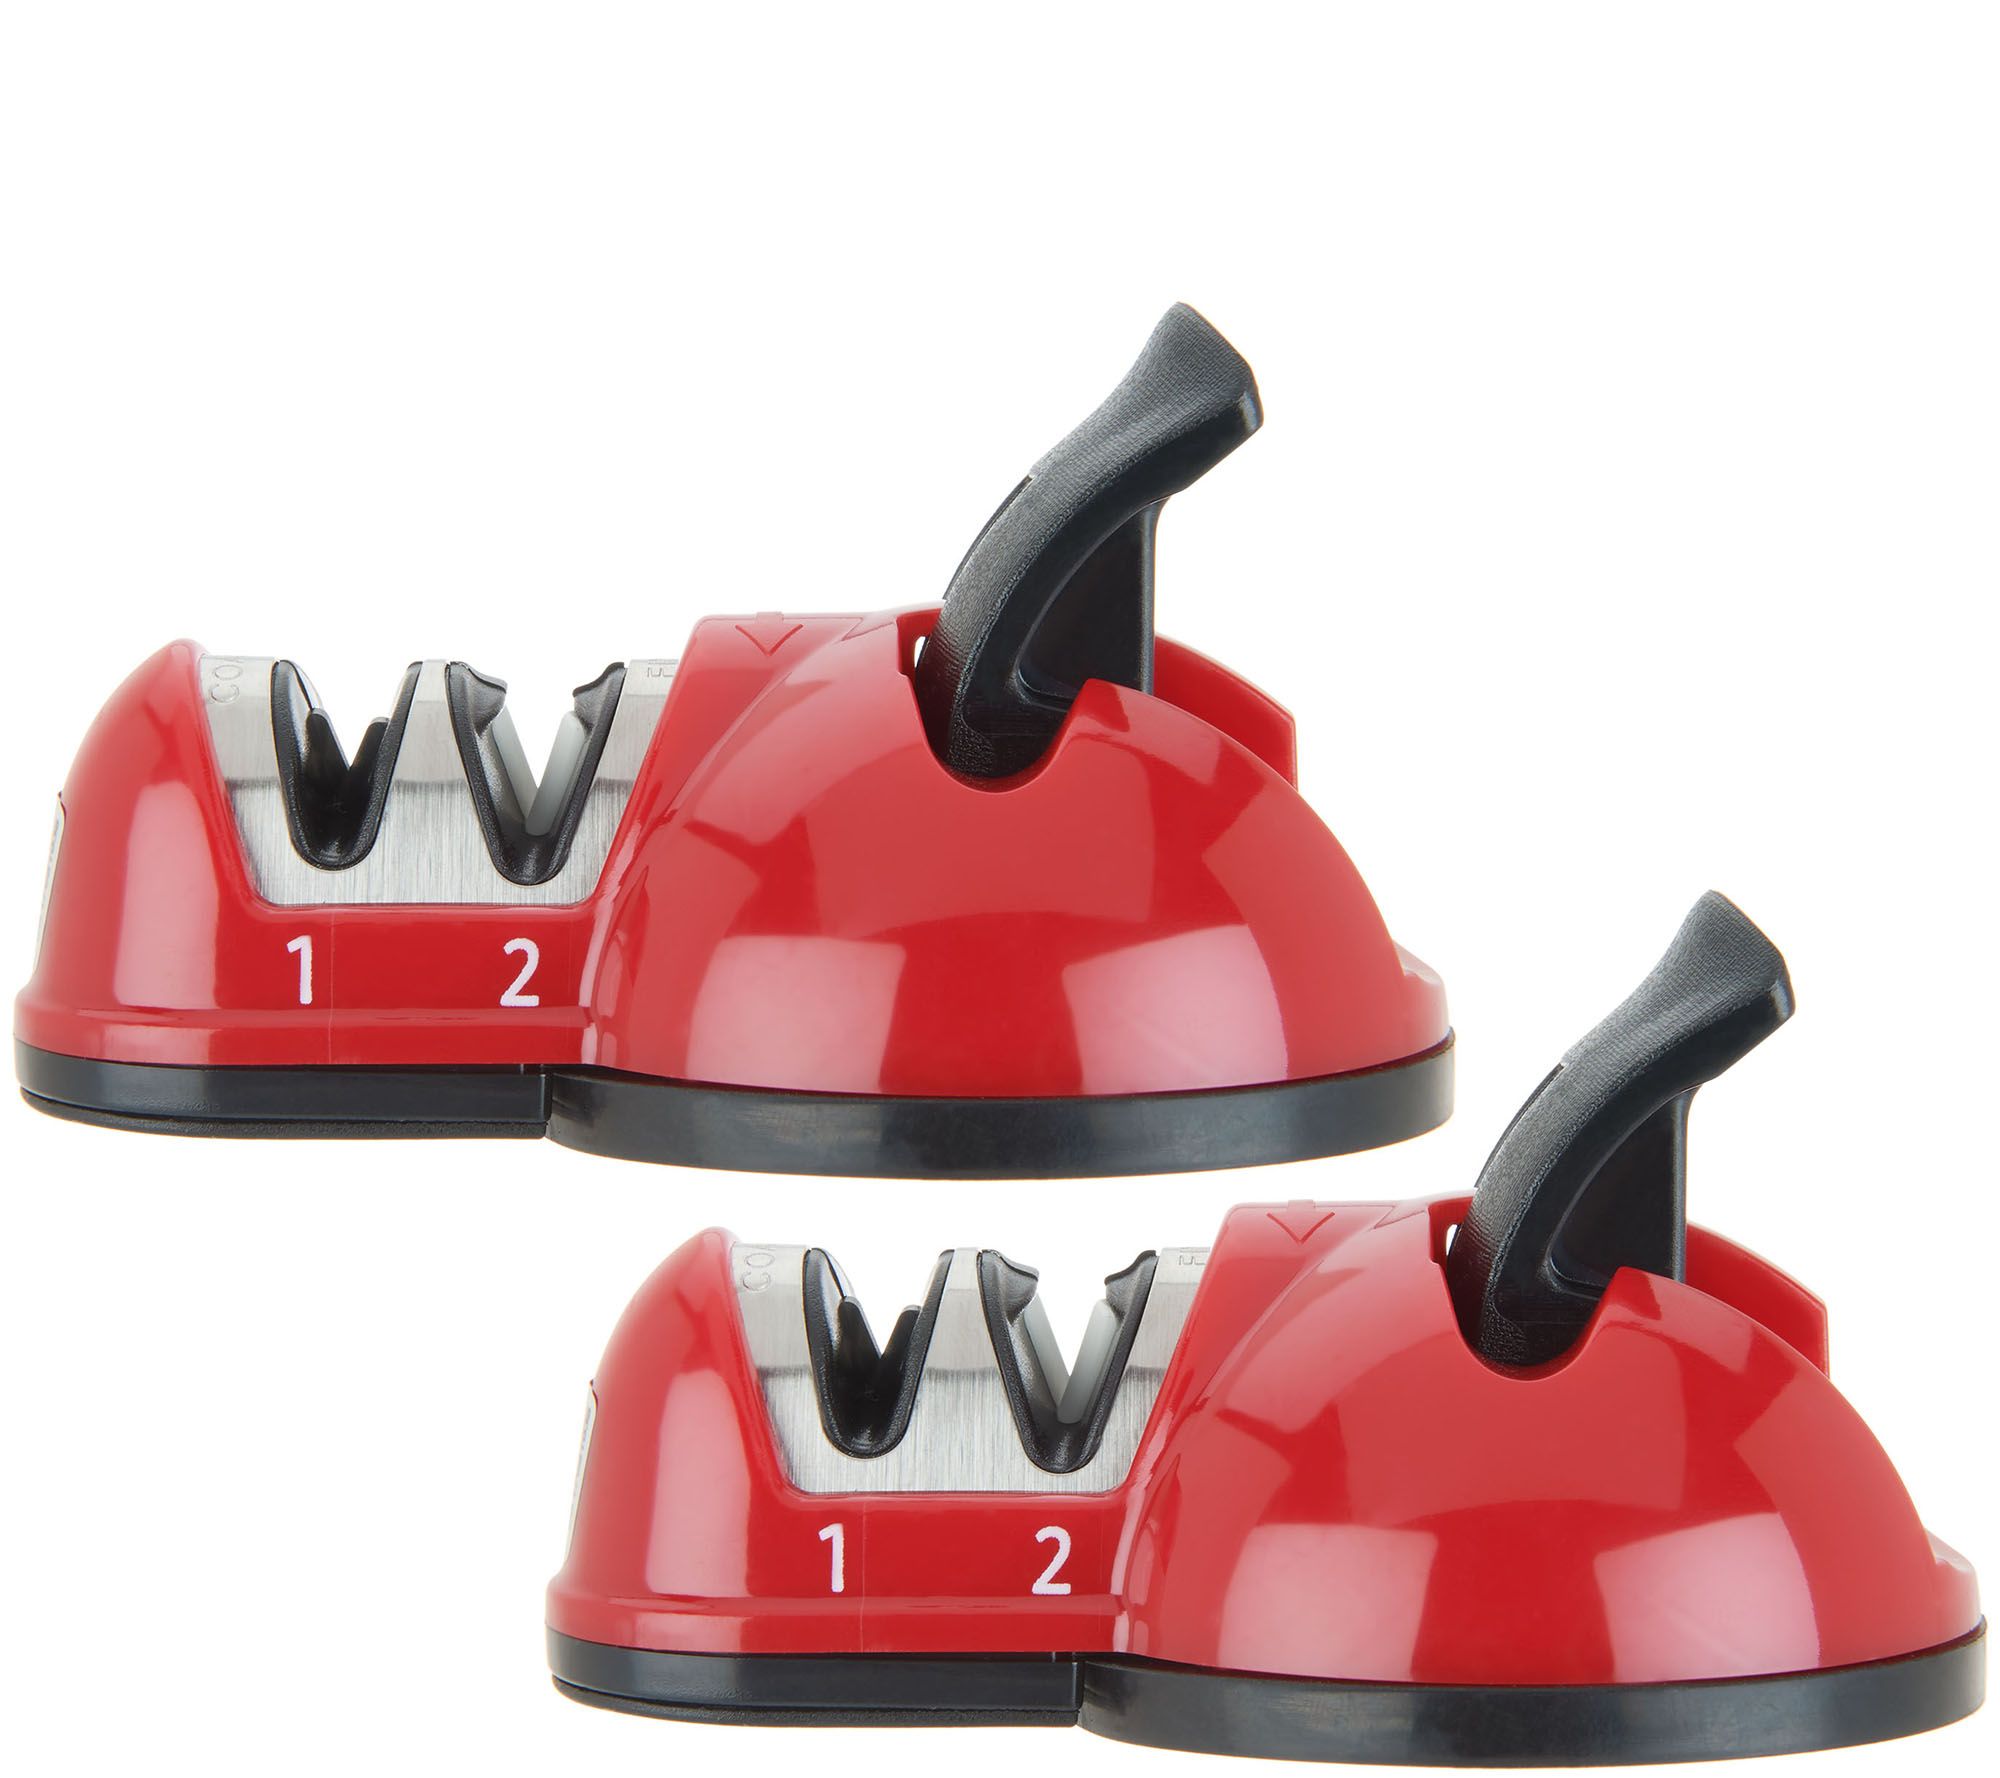 Chefologist Set of (3) 3-Stage Mini Knife Sharpener w/ Gift Boxes on QVC 